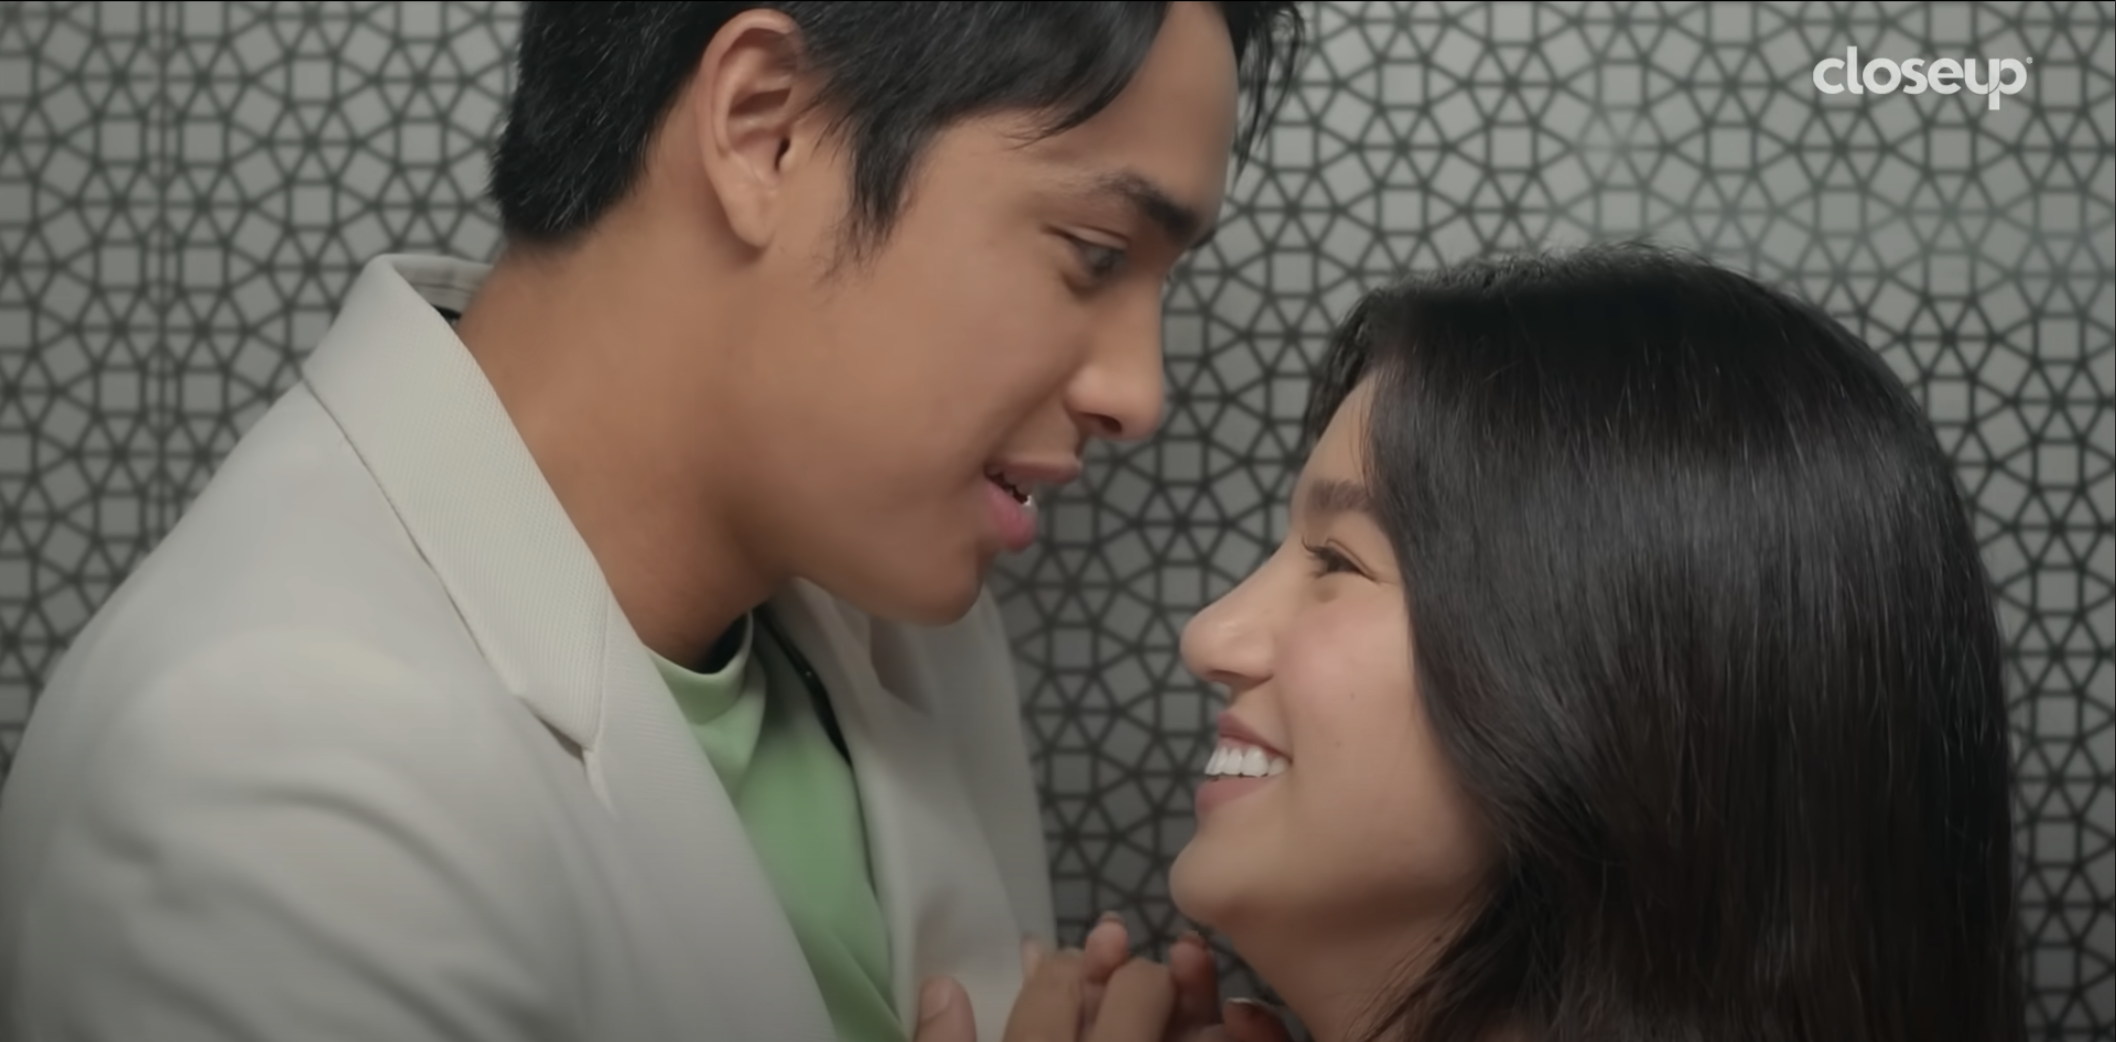 DonBelle Closeup Closer You and I Music Video, Donny Pangilinan, Belle Mariano, DonBelle’s ‘Closer You and I’ Music Video Hits 1 Million Views in 4 Hours—Watch It Here!